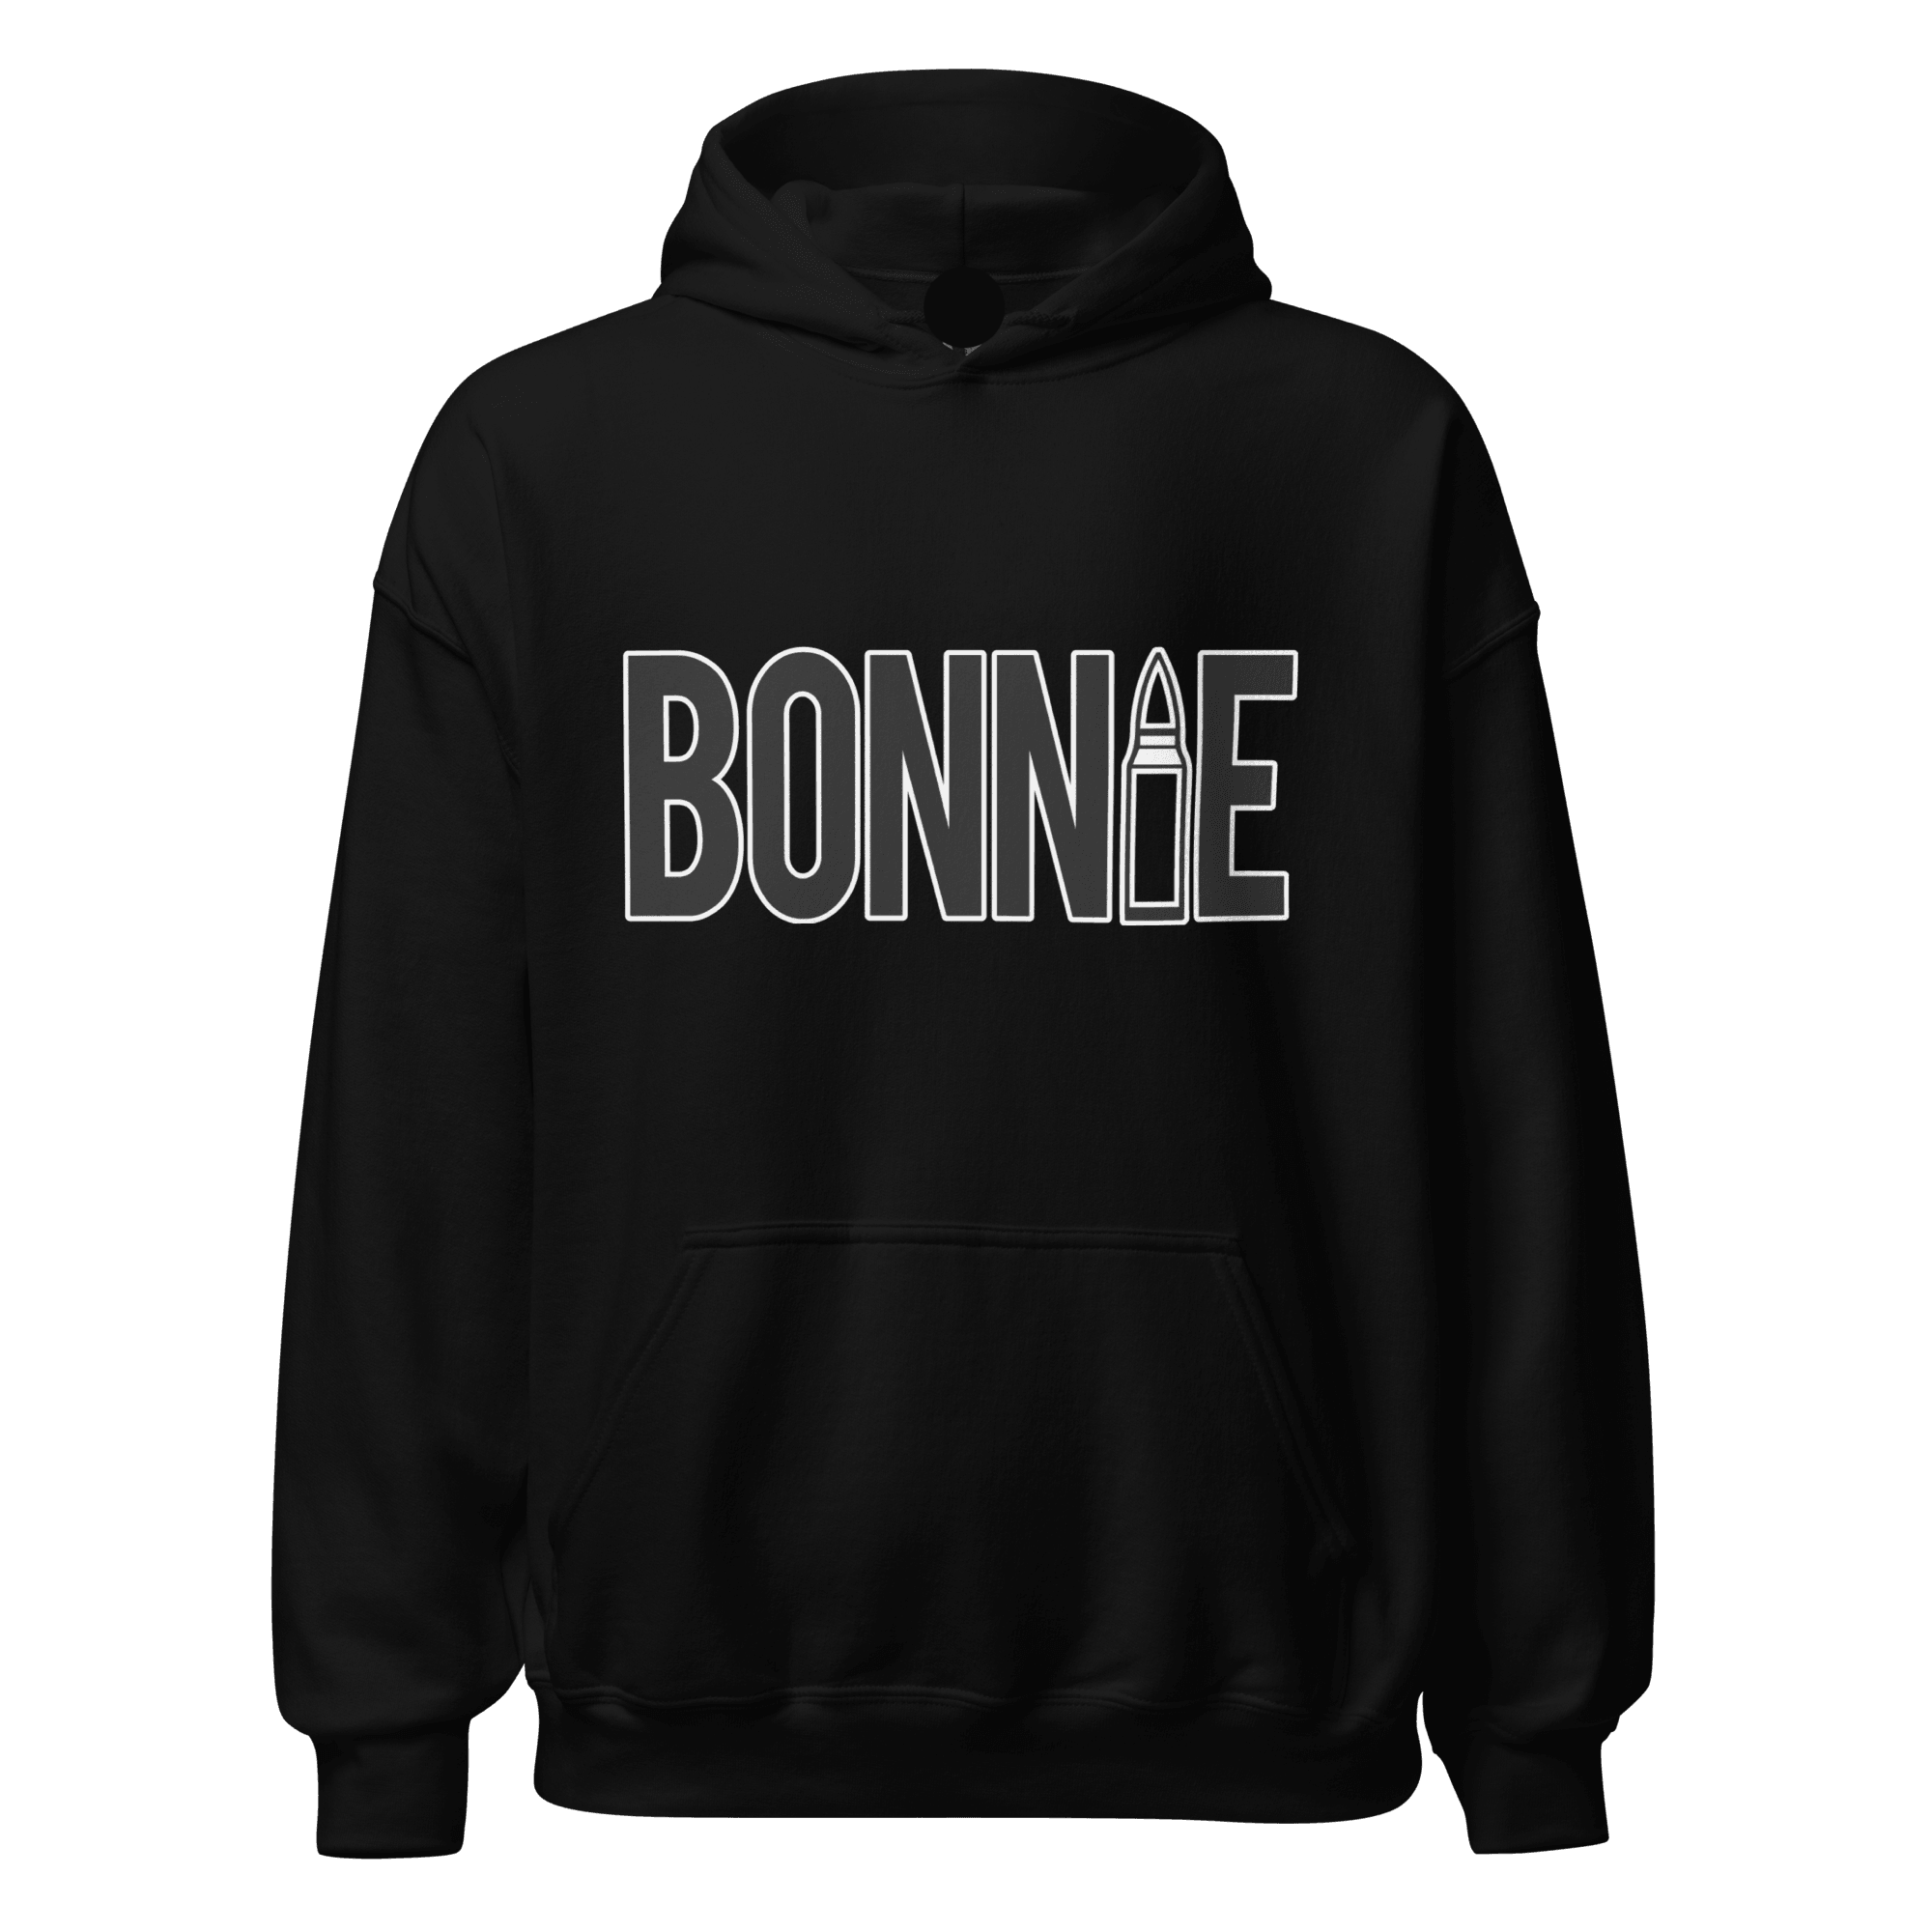 Ultra Soft Blended Cotton Bonnie and Clyde Couples Hoodie Set - TopKoalaTee